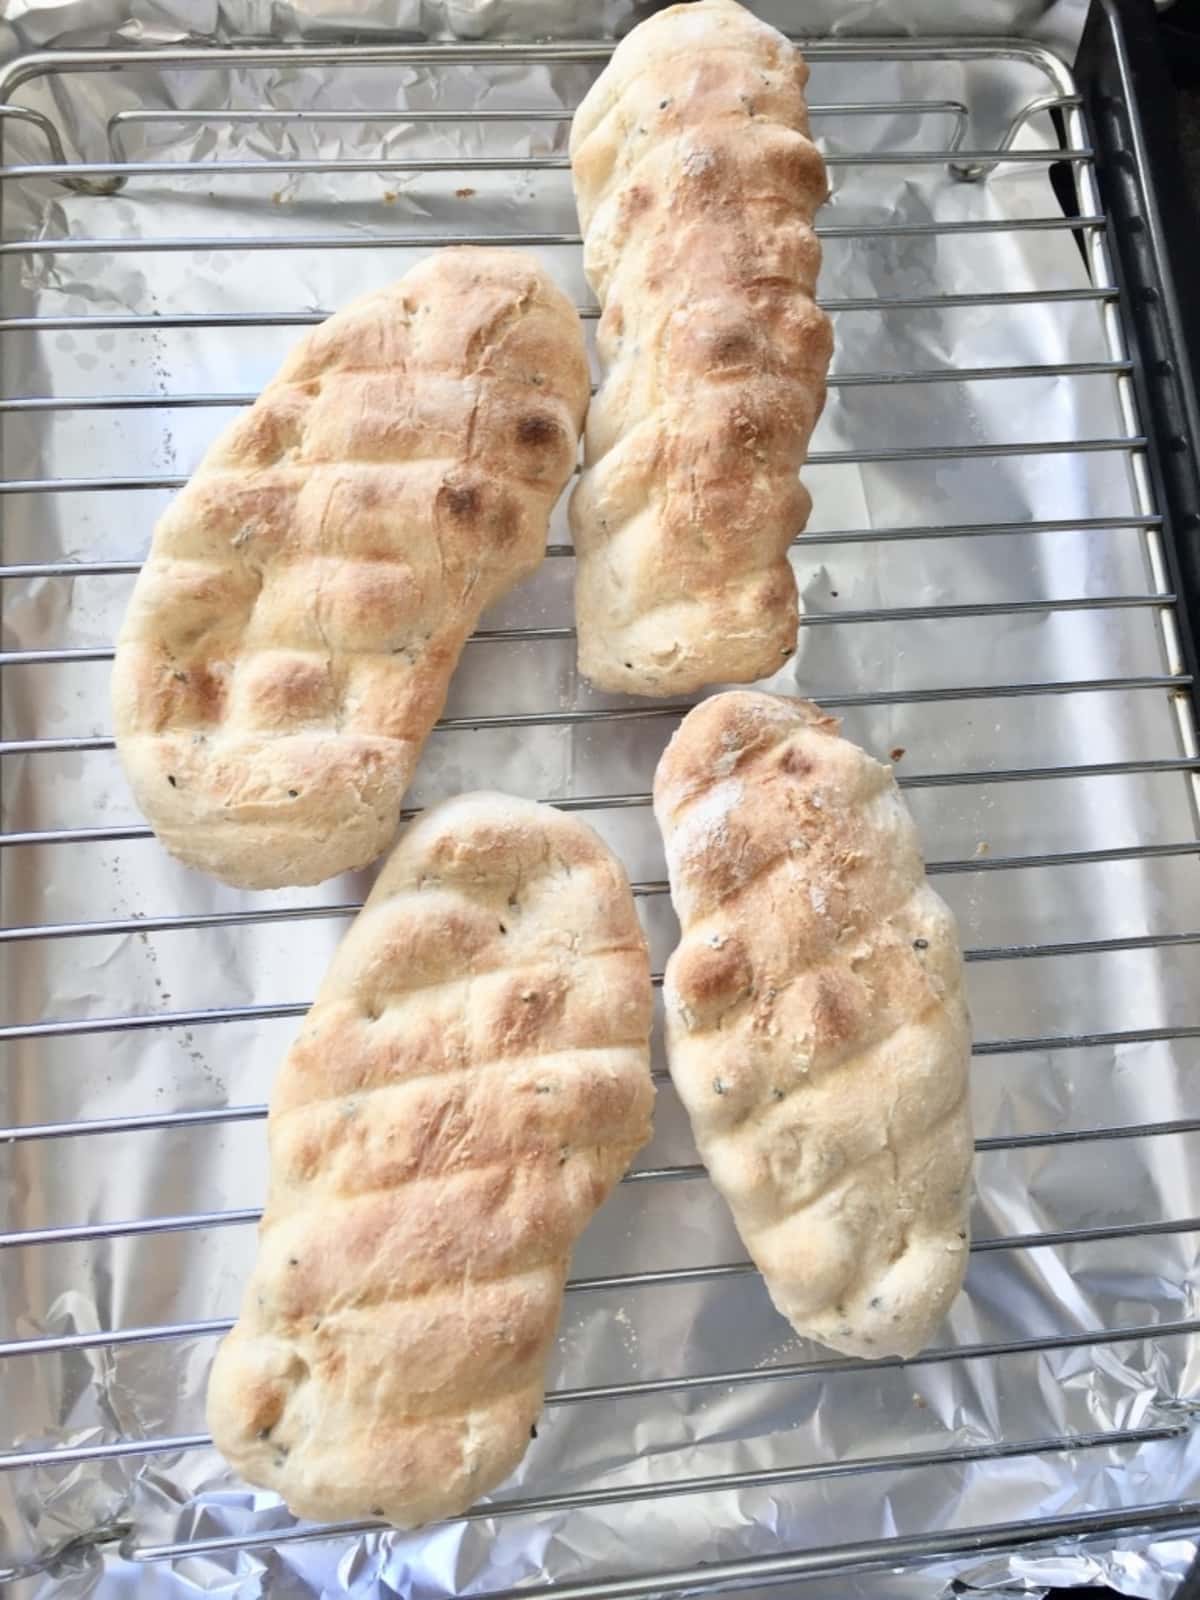 4 cooked naan breads on a grill rack.